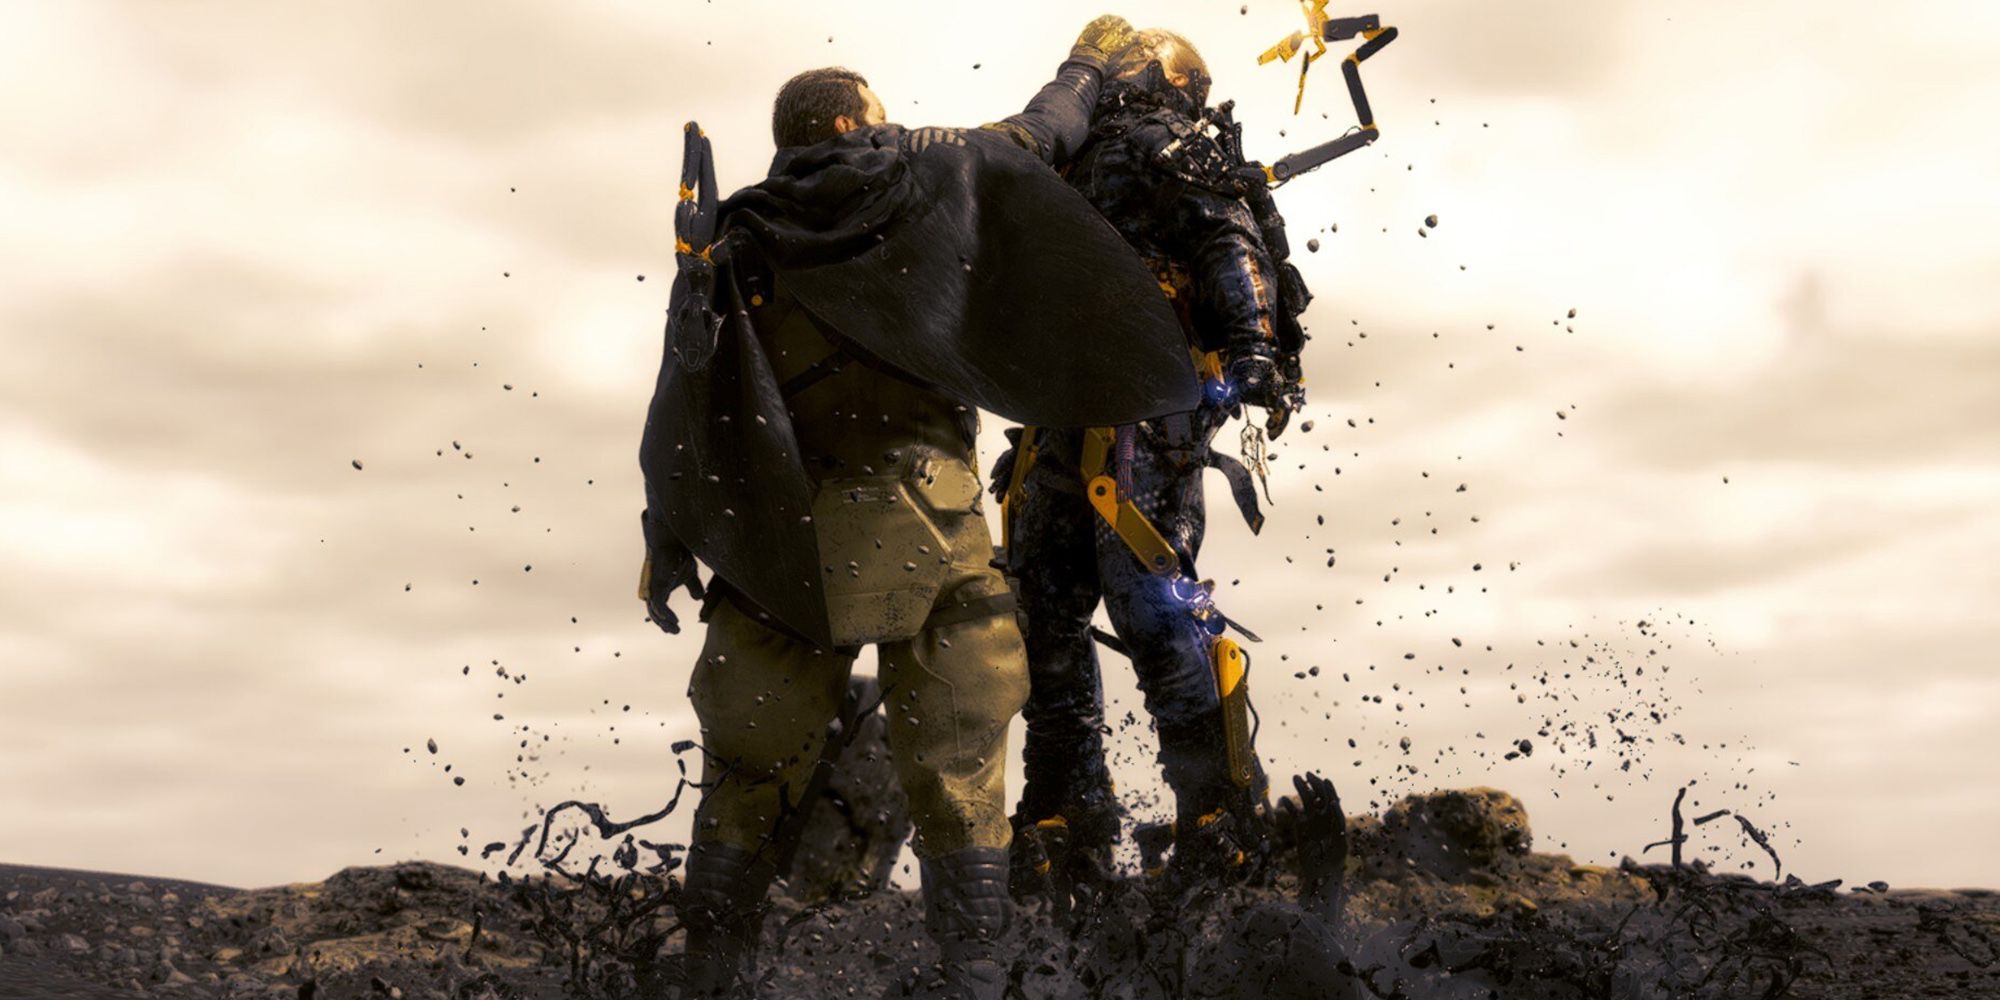 Death Stranding  - Higgs Lifting Up Sam With His Golden Mask, Also Showing How Tall He Is